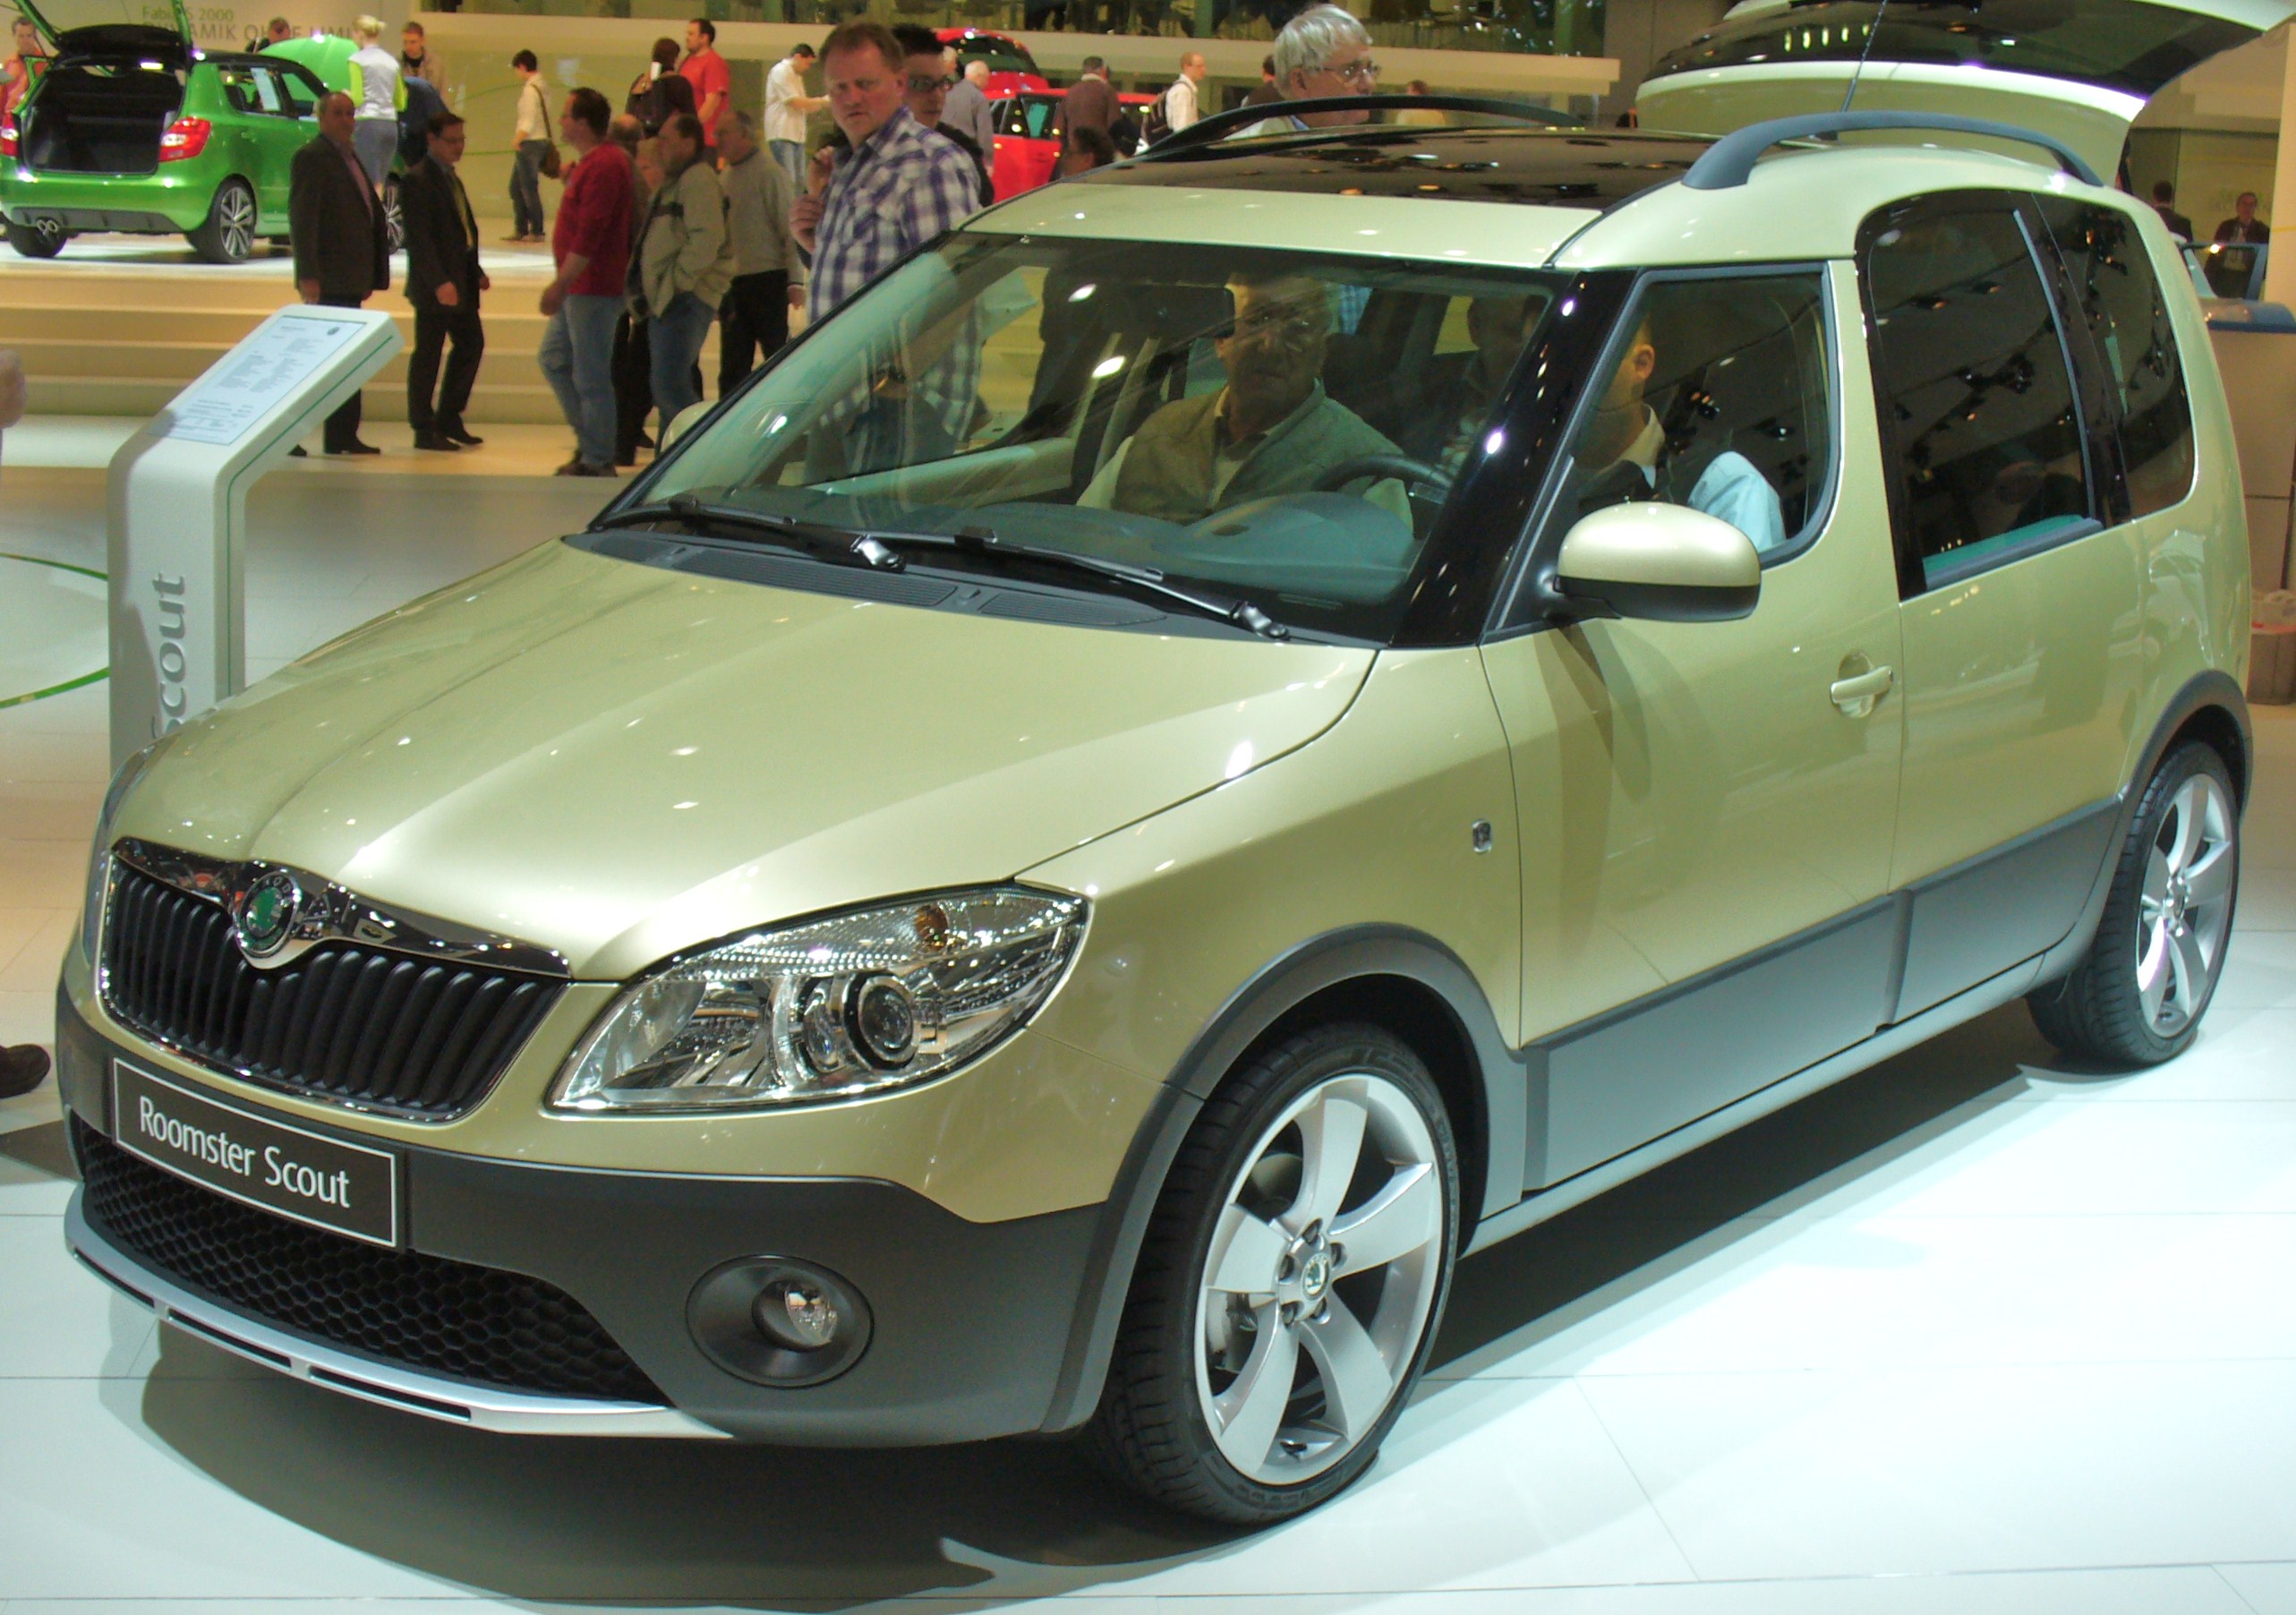 Car Review: Škoda Roomster Scout